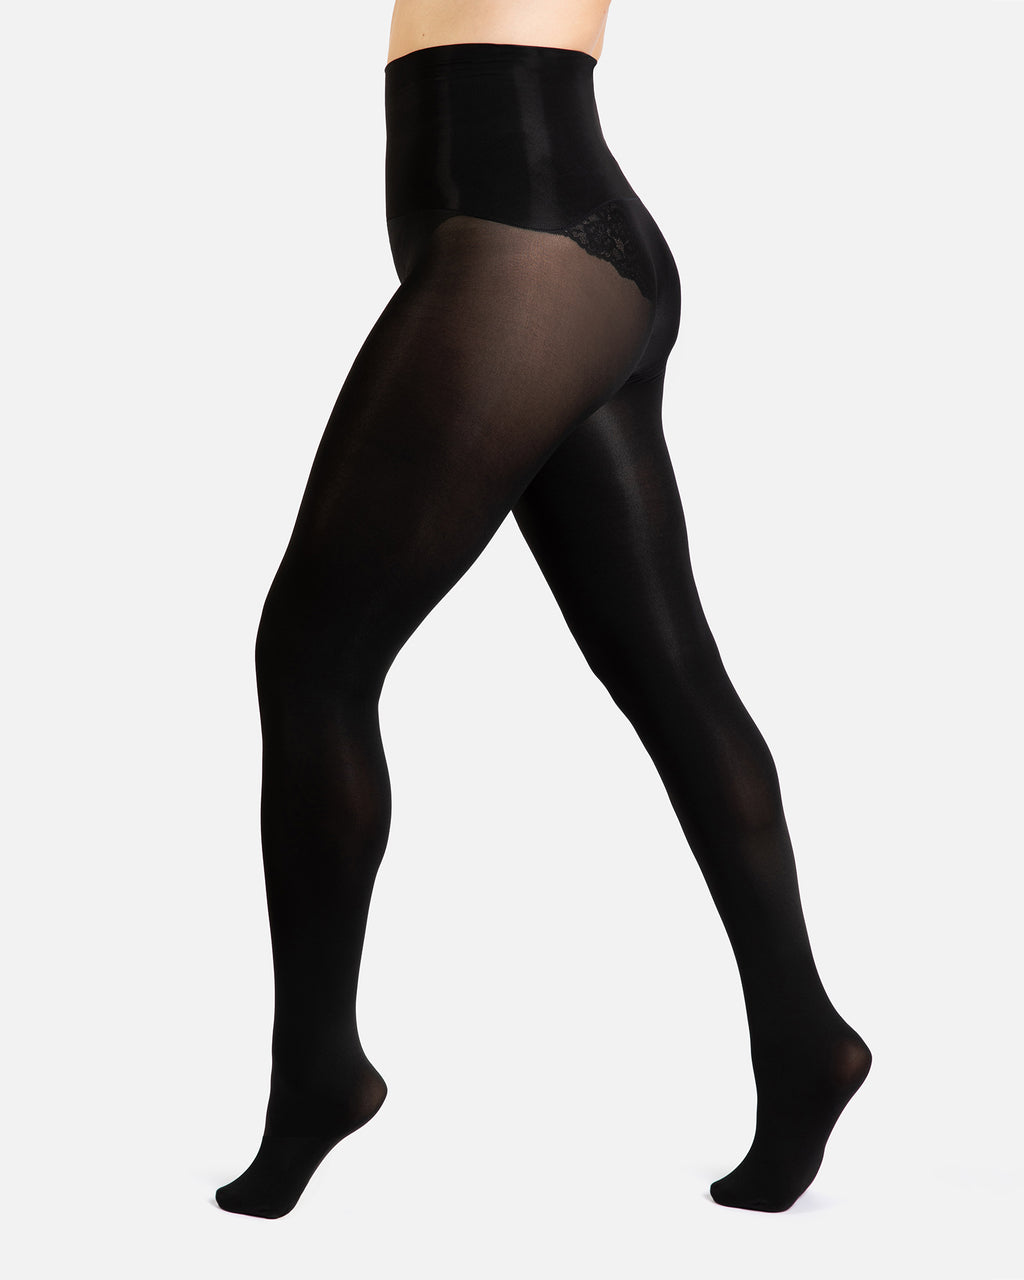 Sheertex Tights: Why These Perfect Stockings Are Worth It